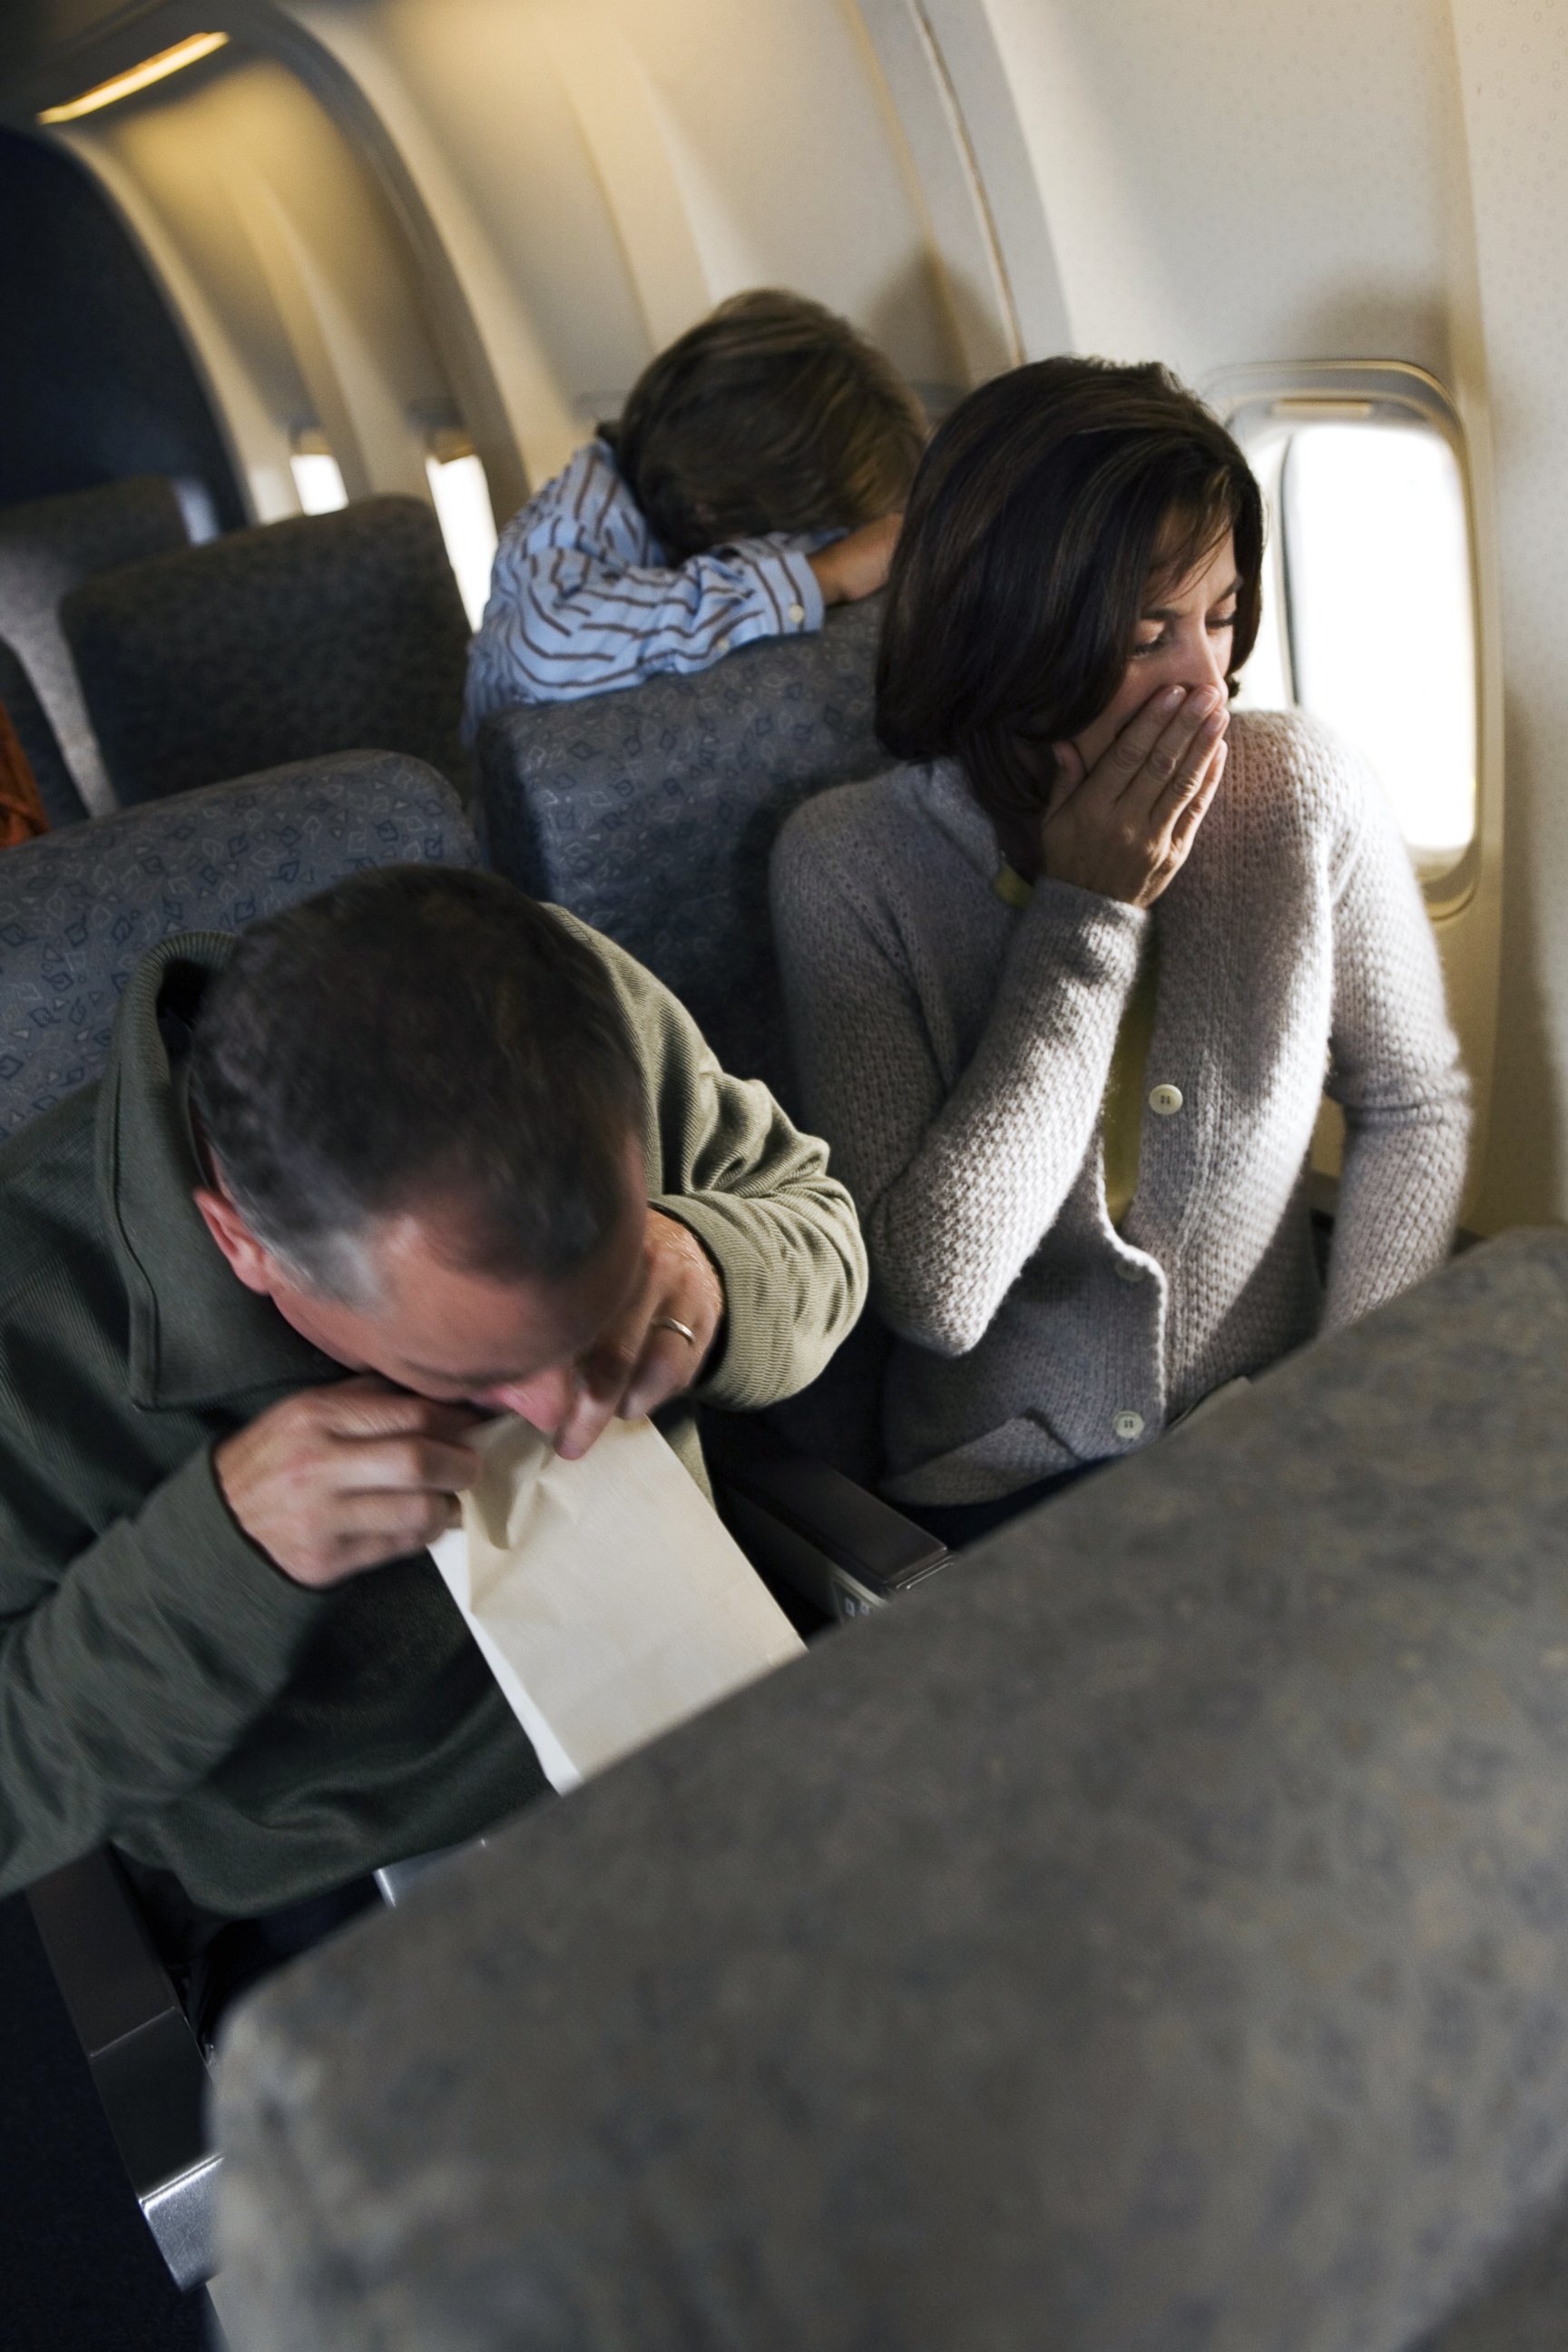 PHOTO: With the U.S. on high alert about Ebola, it's probably not a good conversation topic in flight.